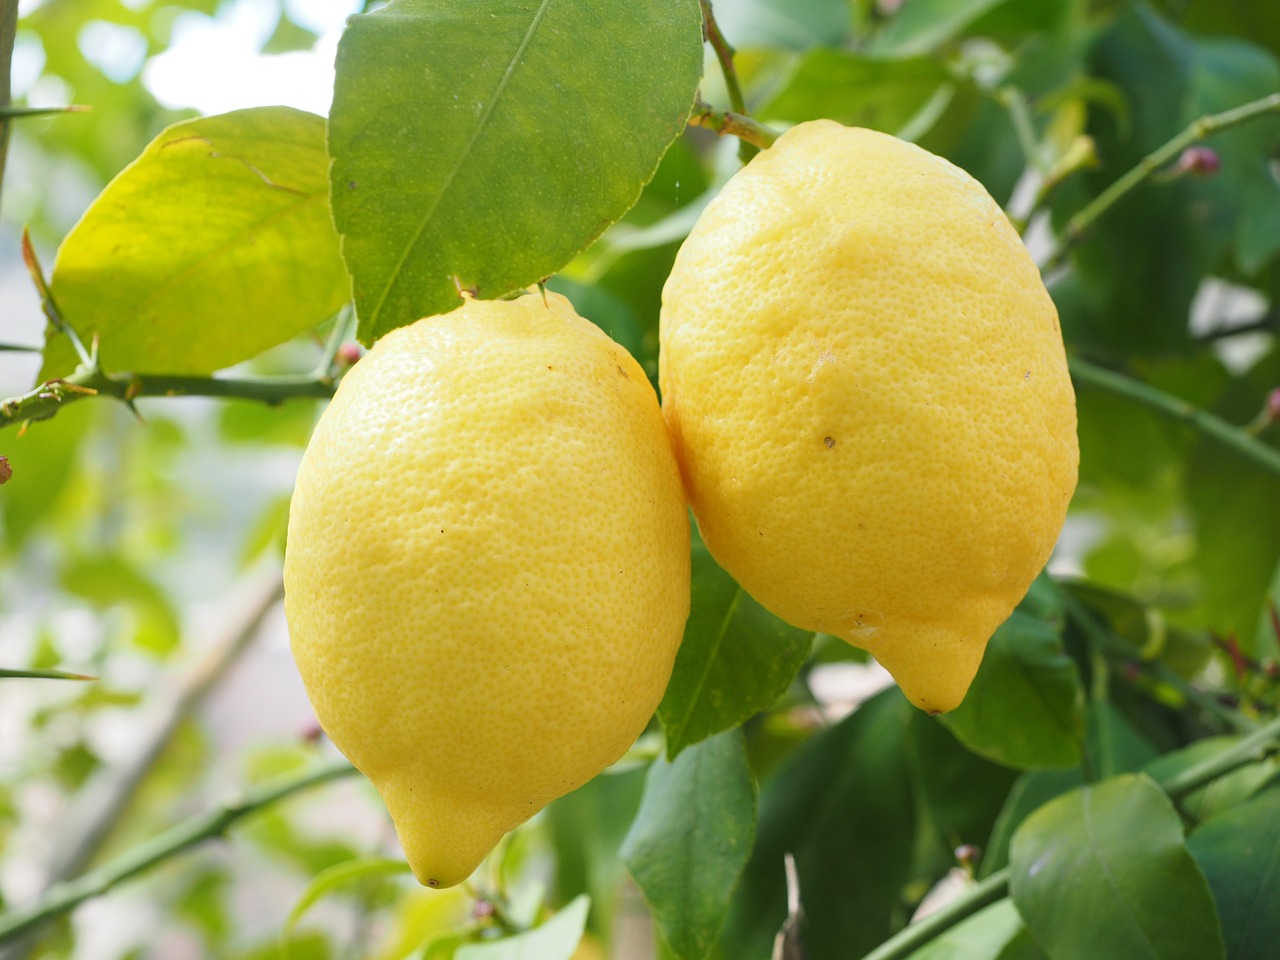 20 Varieties And Types Of Lemons From All Over The World - MORFLORA